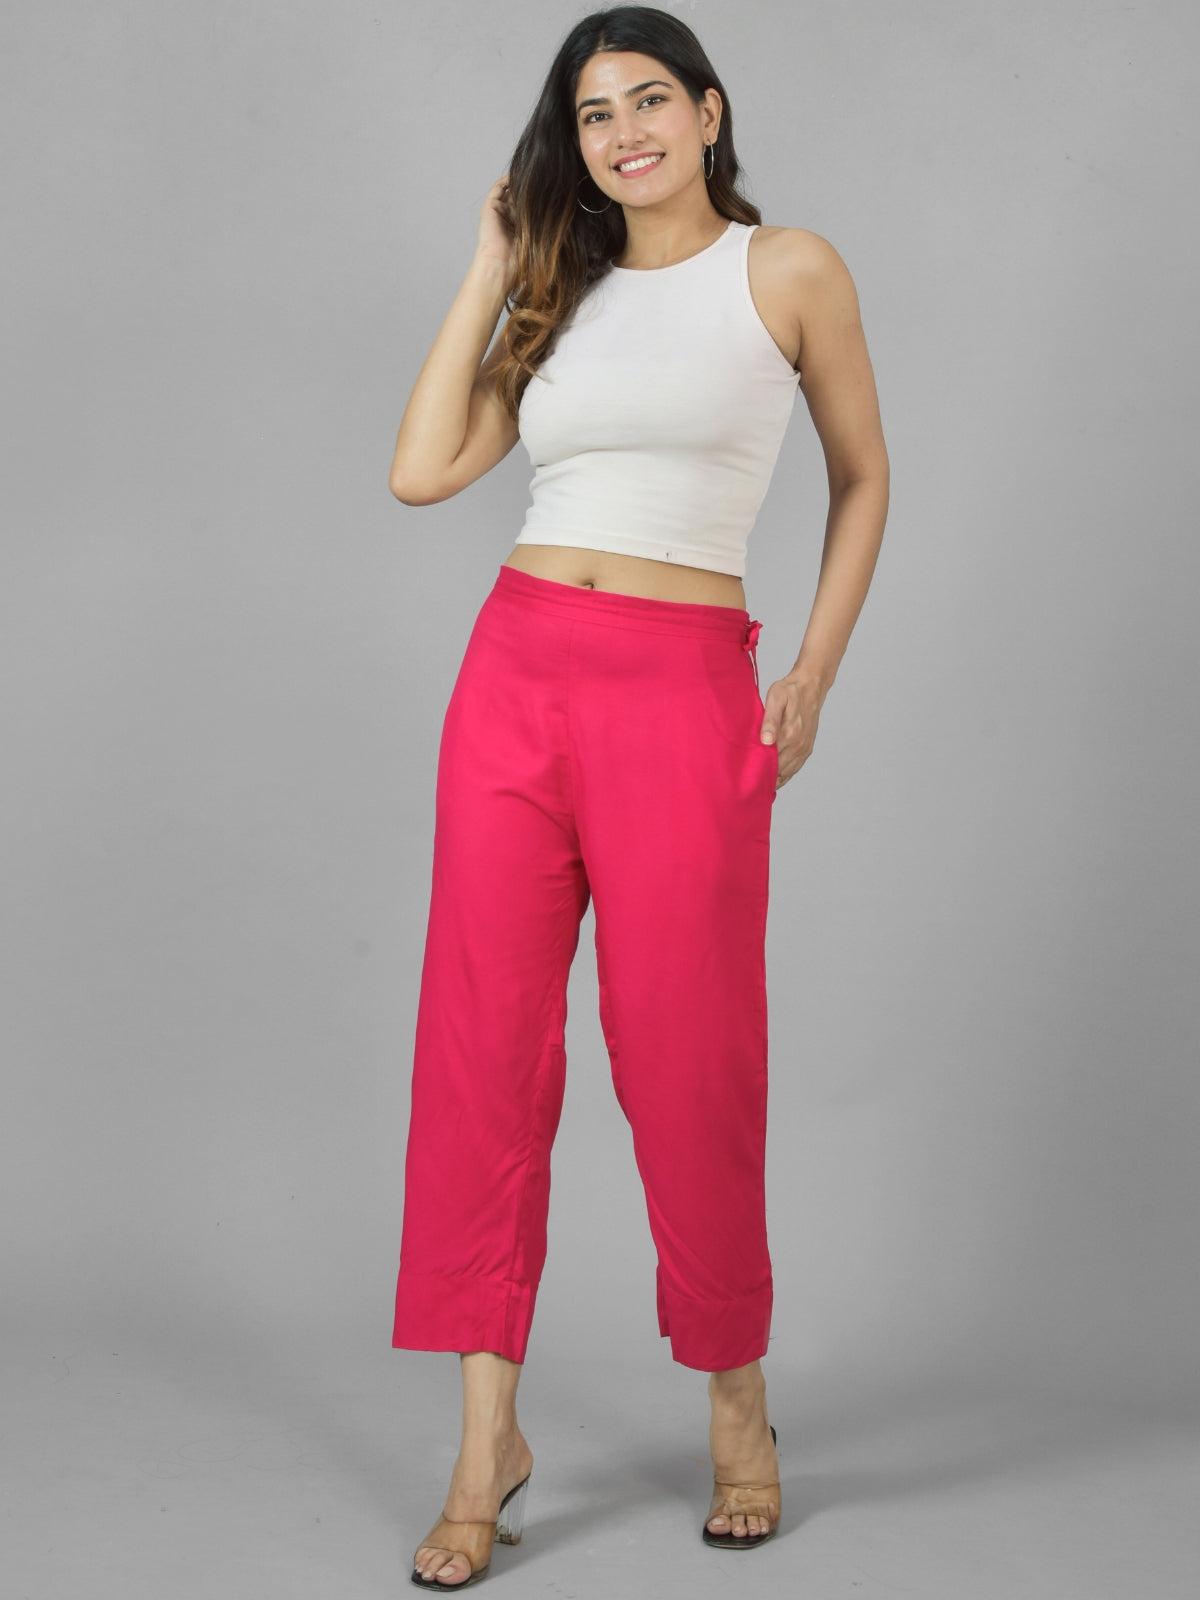 Pack Of 2 Womens Rani Pink And White Ankle Length Rayon Culottes Trouser Combo